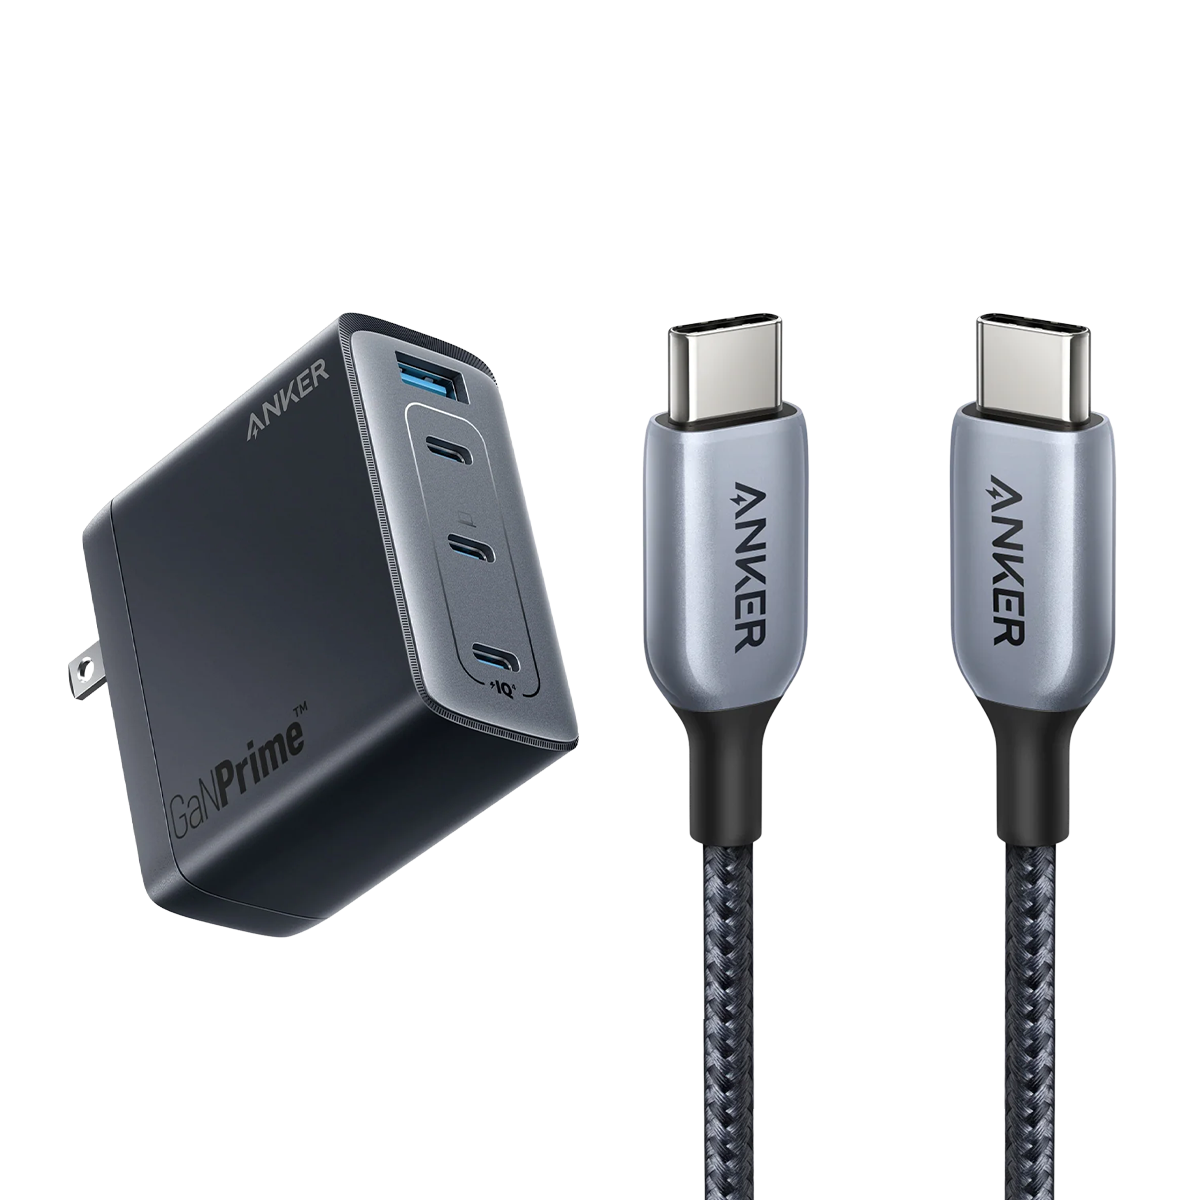 Anker <b>747</b> Charger (GaNPrime 150W) and Anker <b>765</b> USB-C to USB-C Cable (240W Nylon)